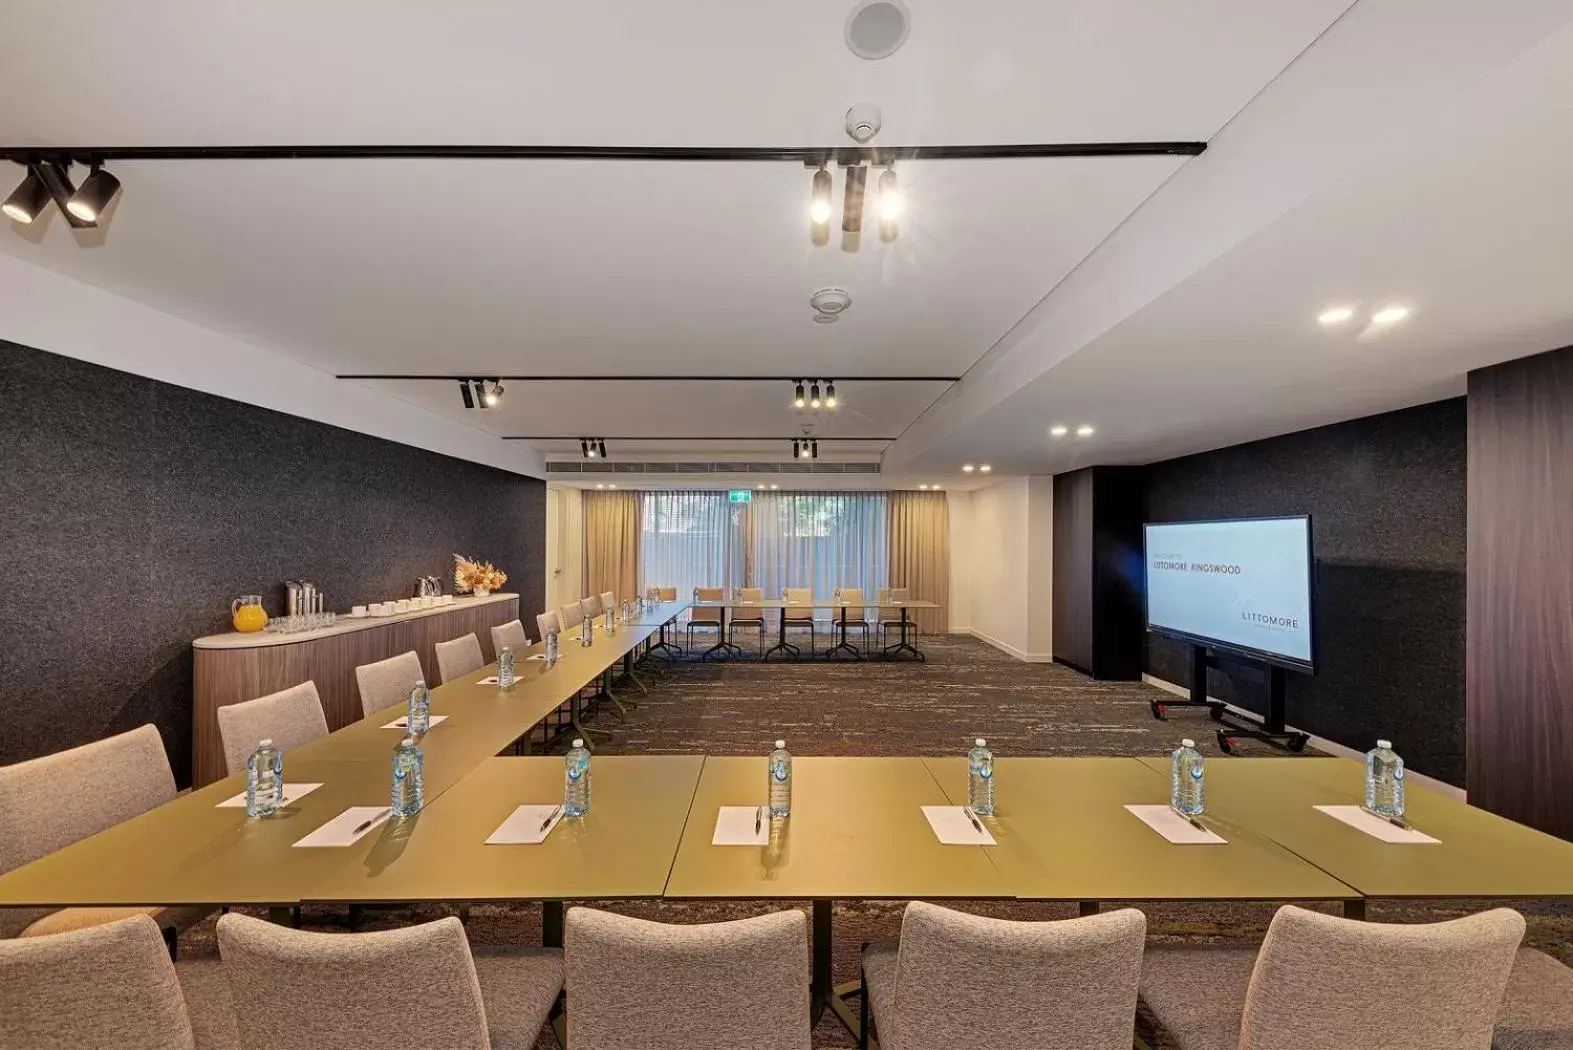 Meeting/conference room in Littomore Suites Kingswood